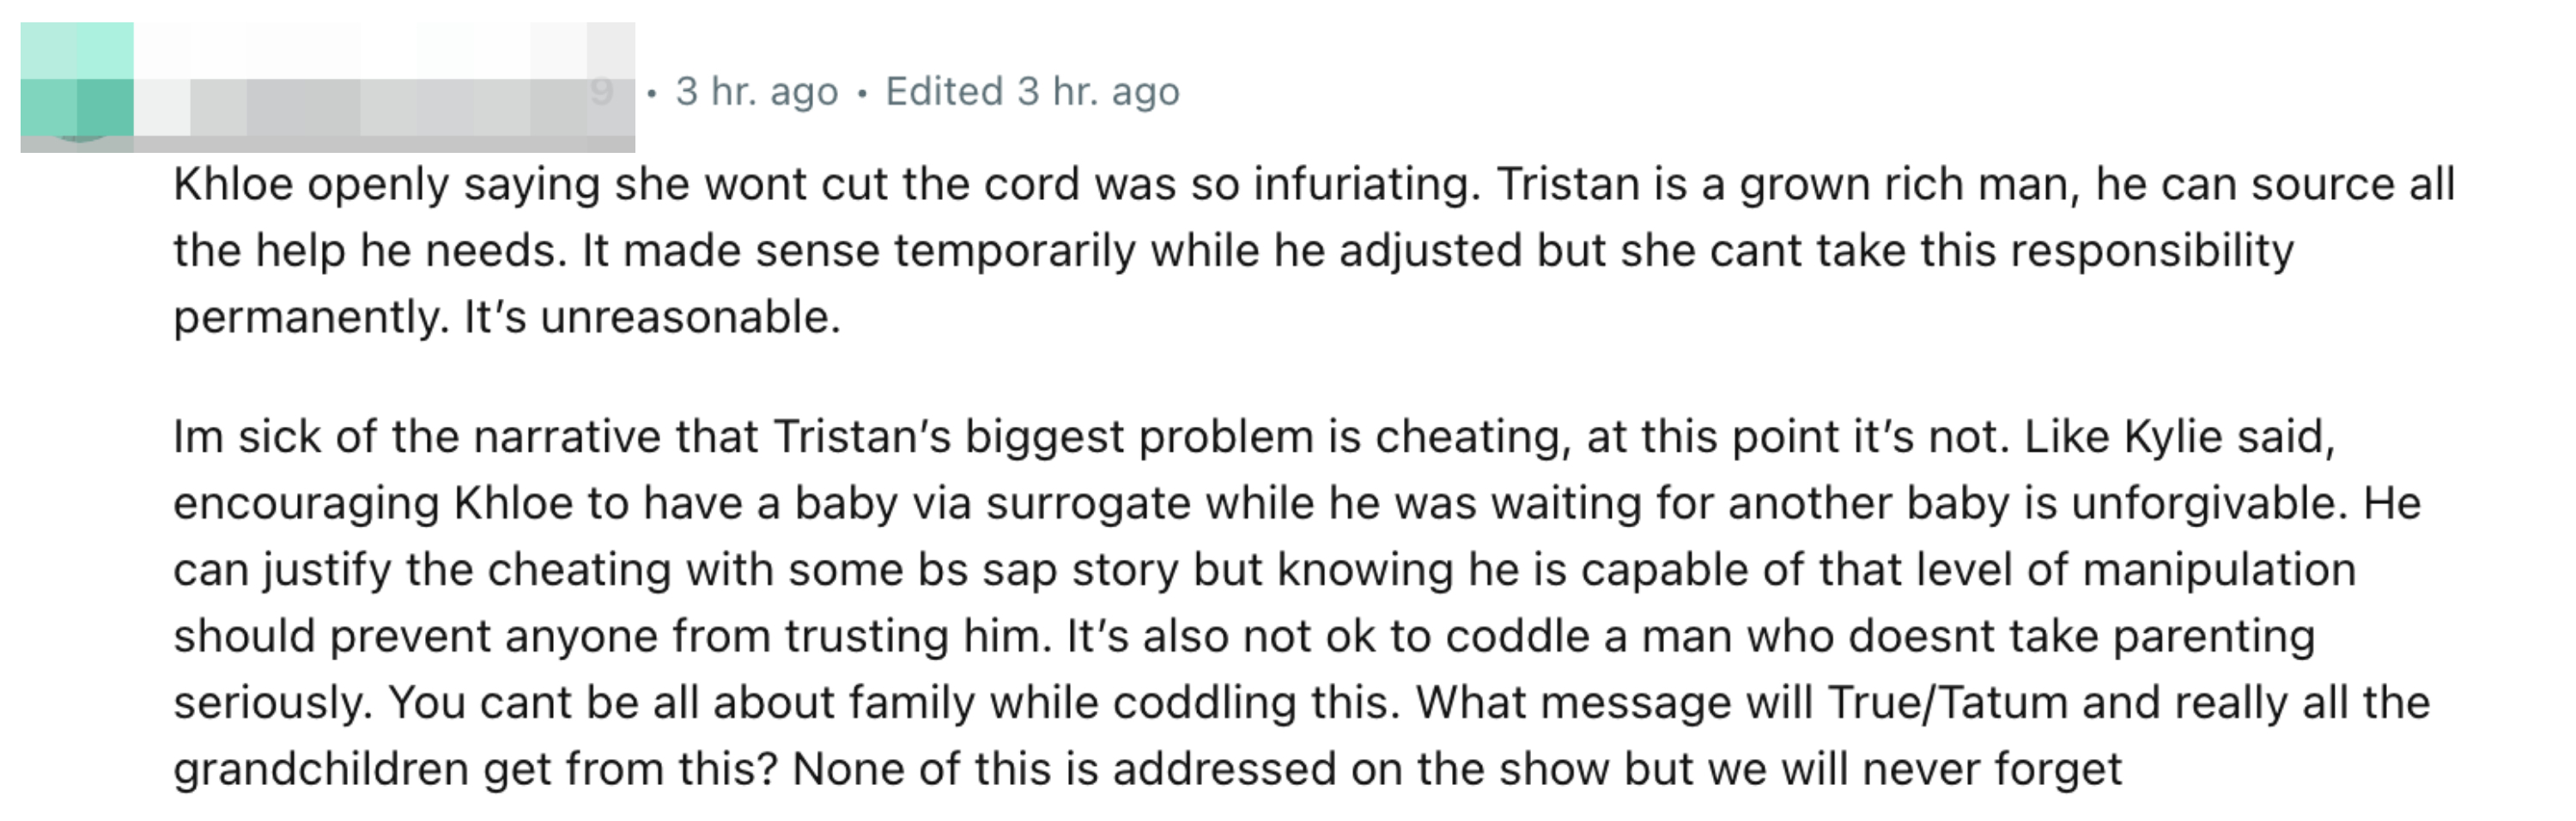 “Im sick of the narrative that Tristan’s biggest problem is cheating, at this point it’s not. Like Kylie said, encouraging Khloe to have a baby via surrogate while he was waiting for another baby is unforgivable”